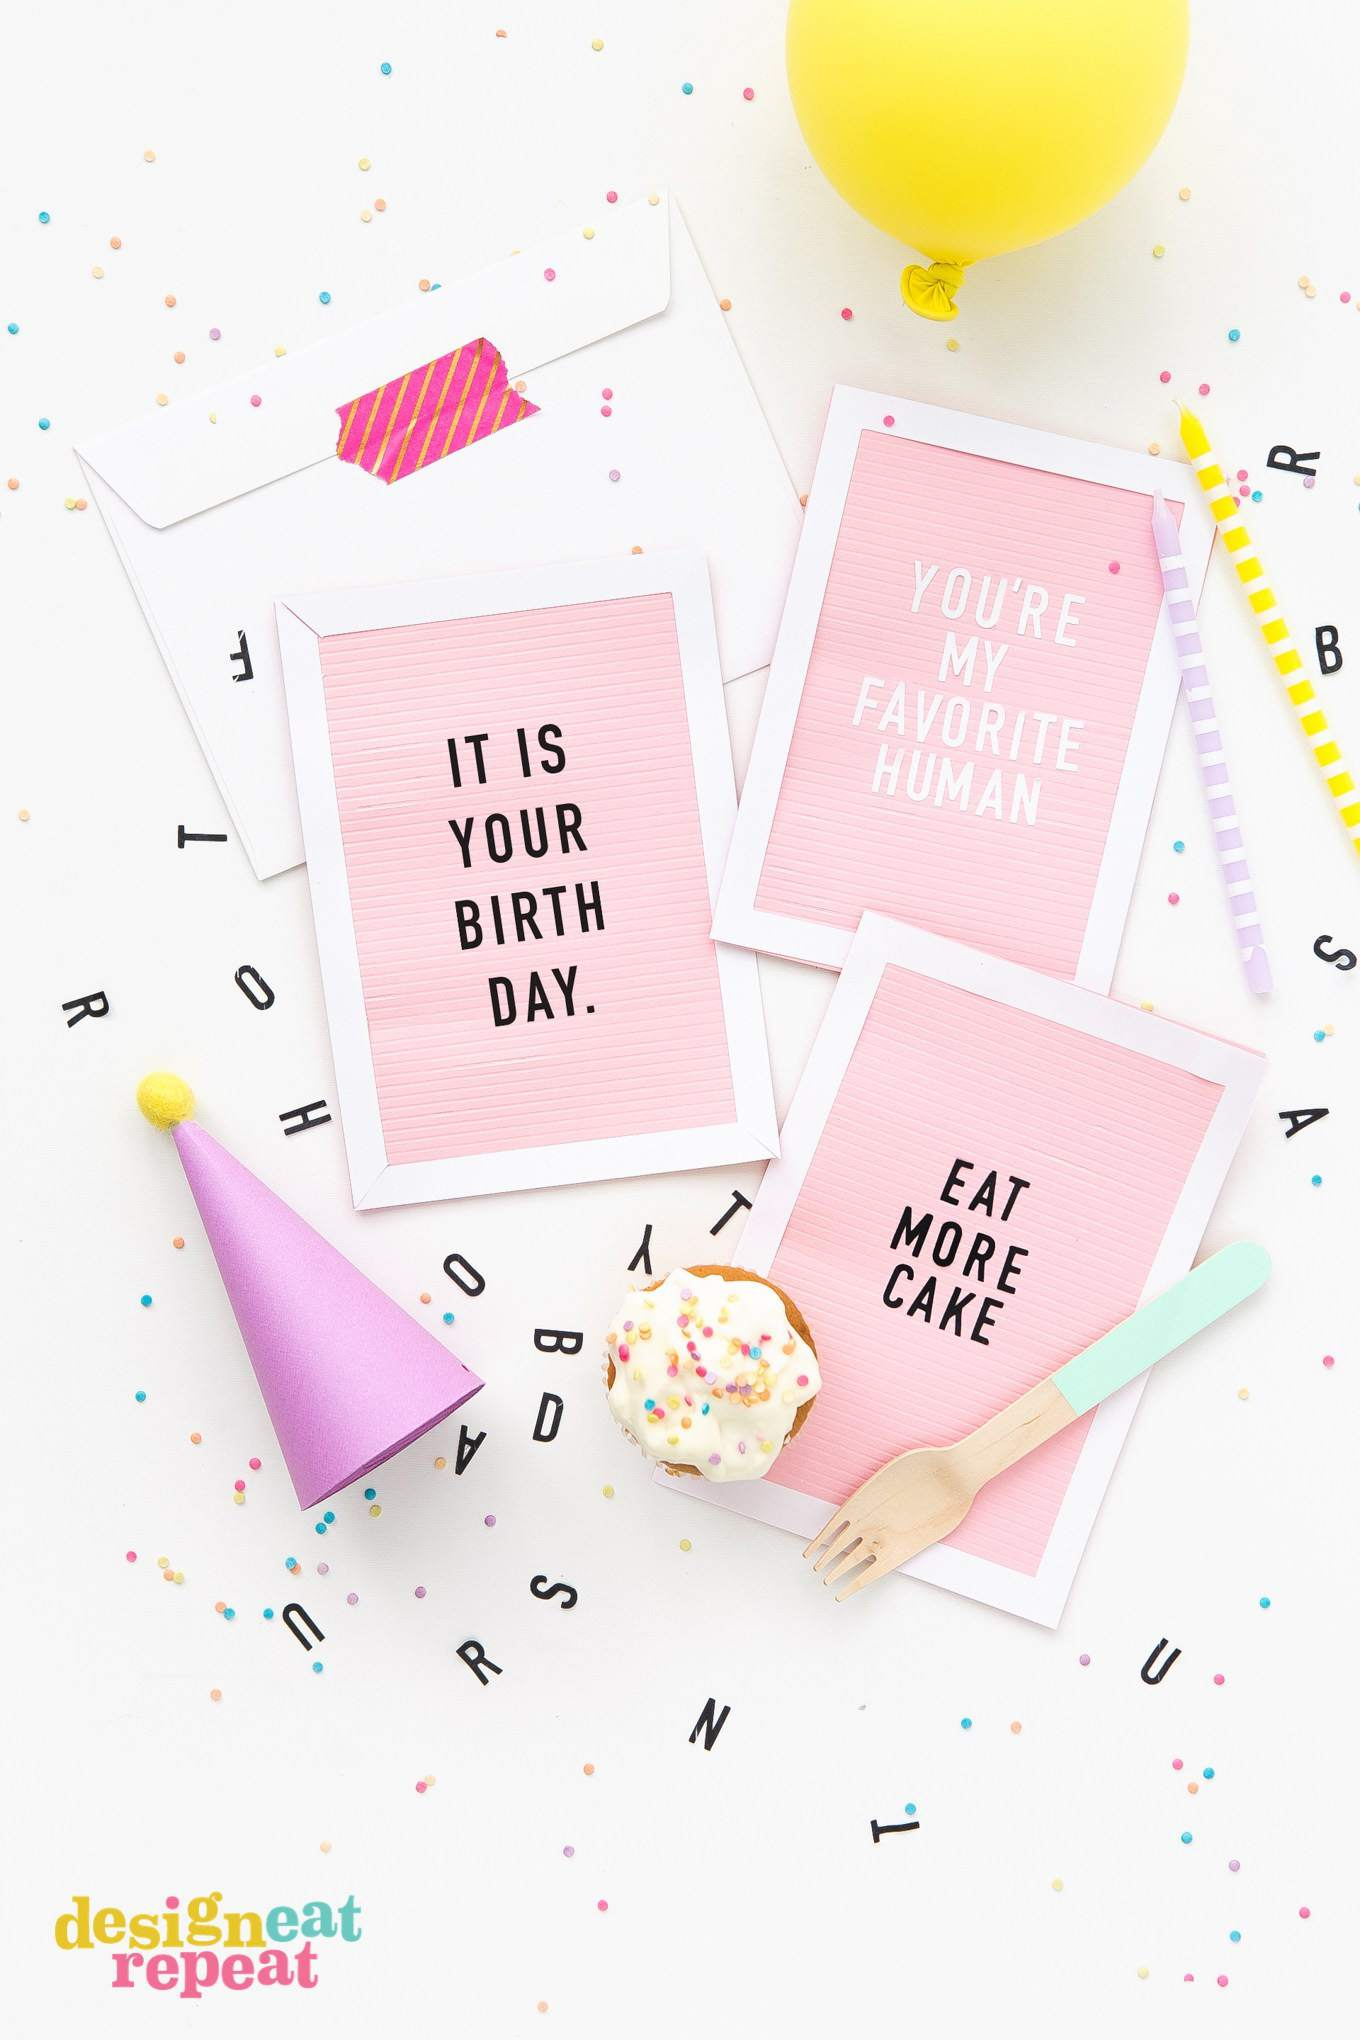 Happy Birthday Card Ideas For Dad Get Inspiration From 25 Of The Best Diy Birthday Cards